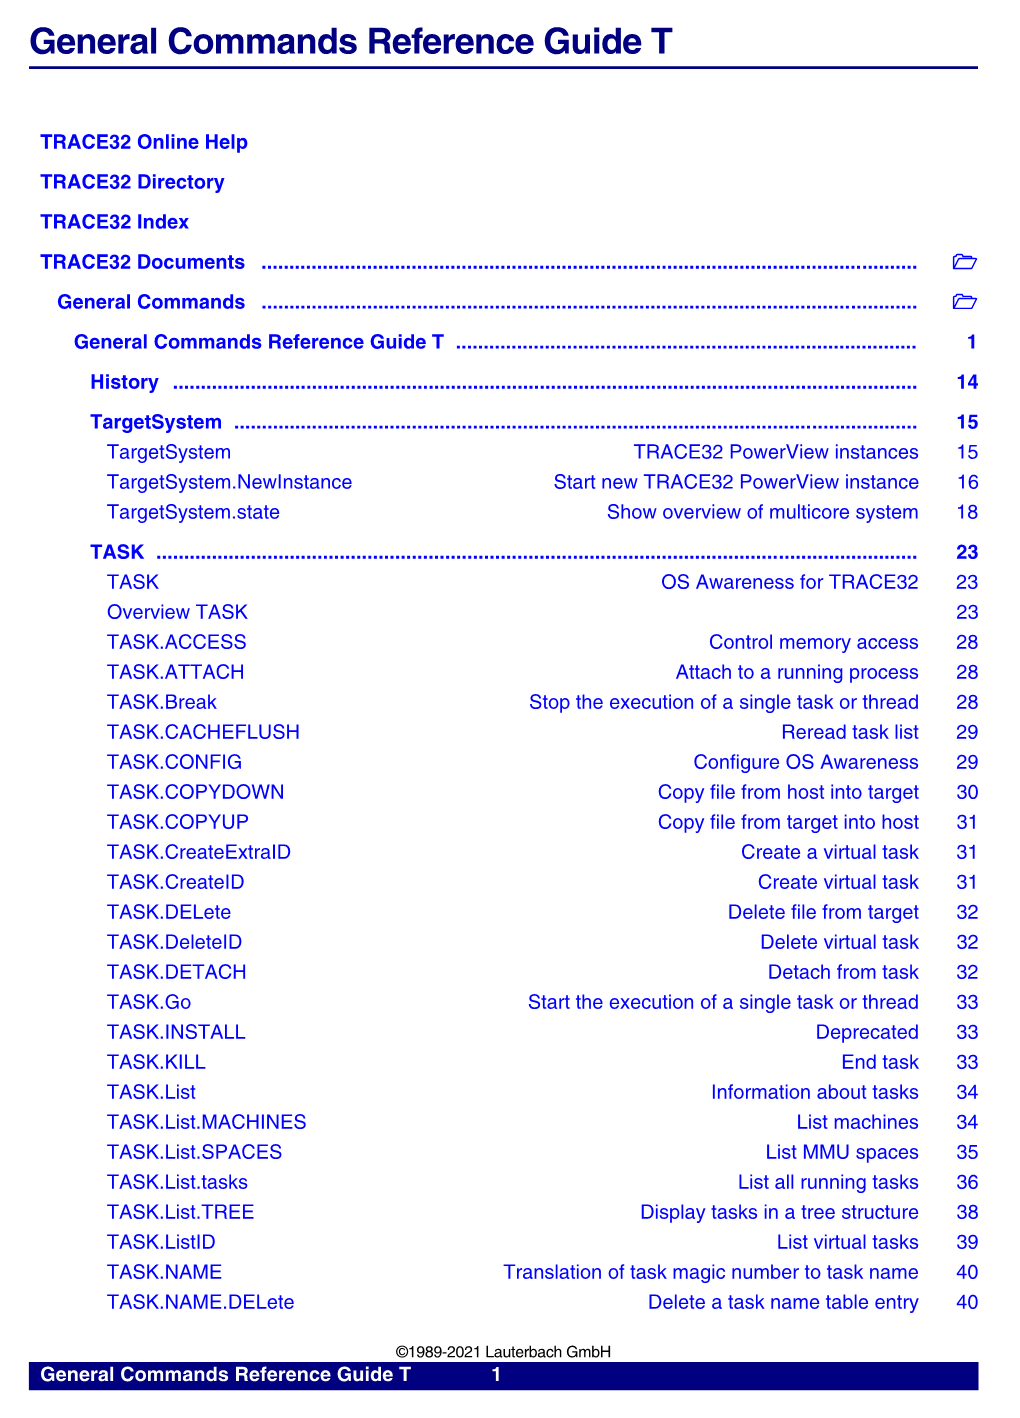 General Commands Reference Guide T